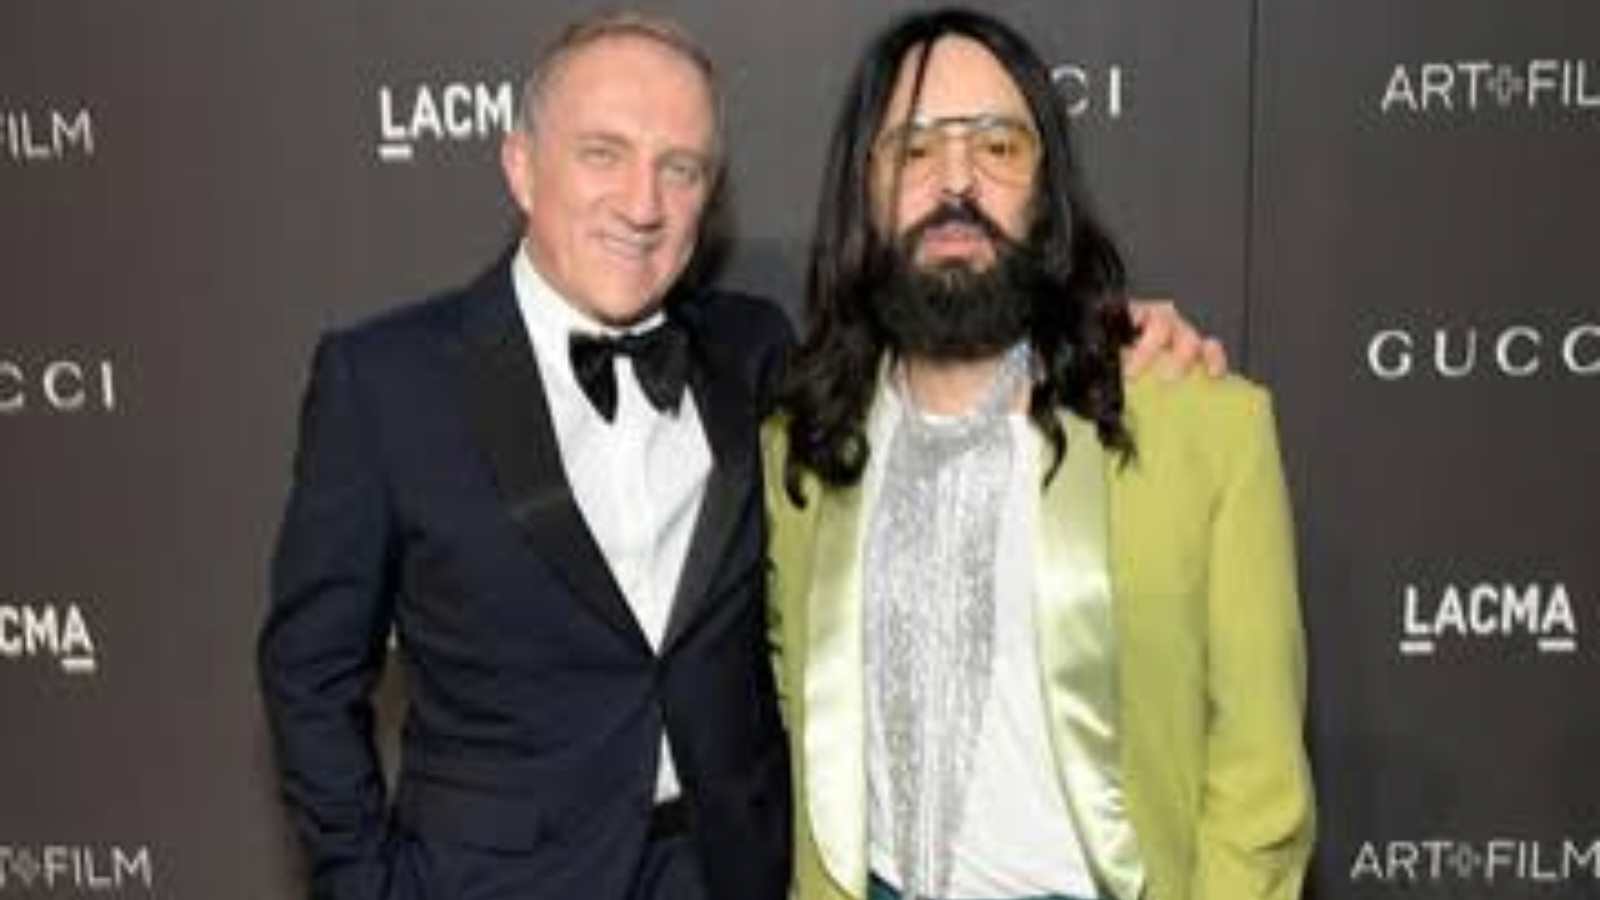 François-Henri Pinault and Alessandro Michele